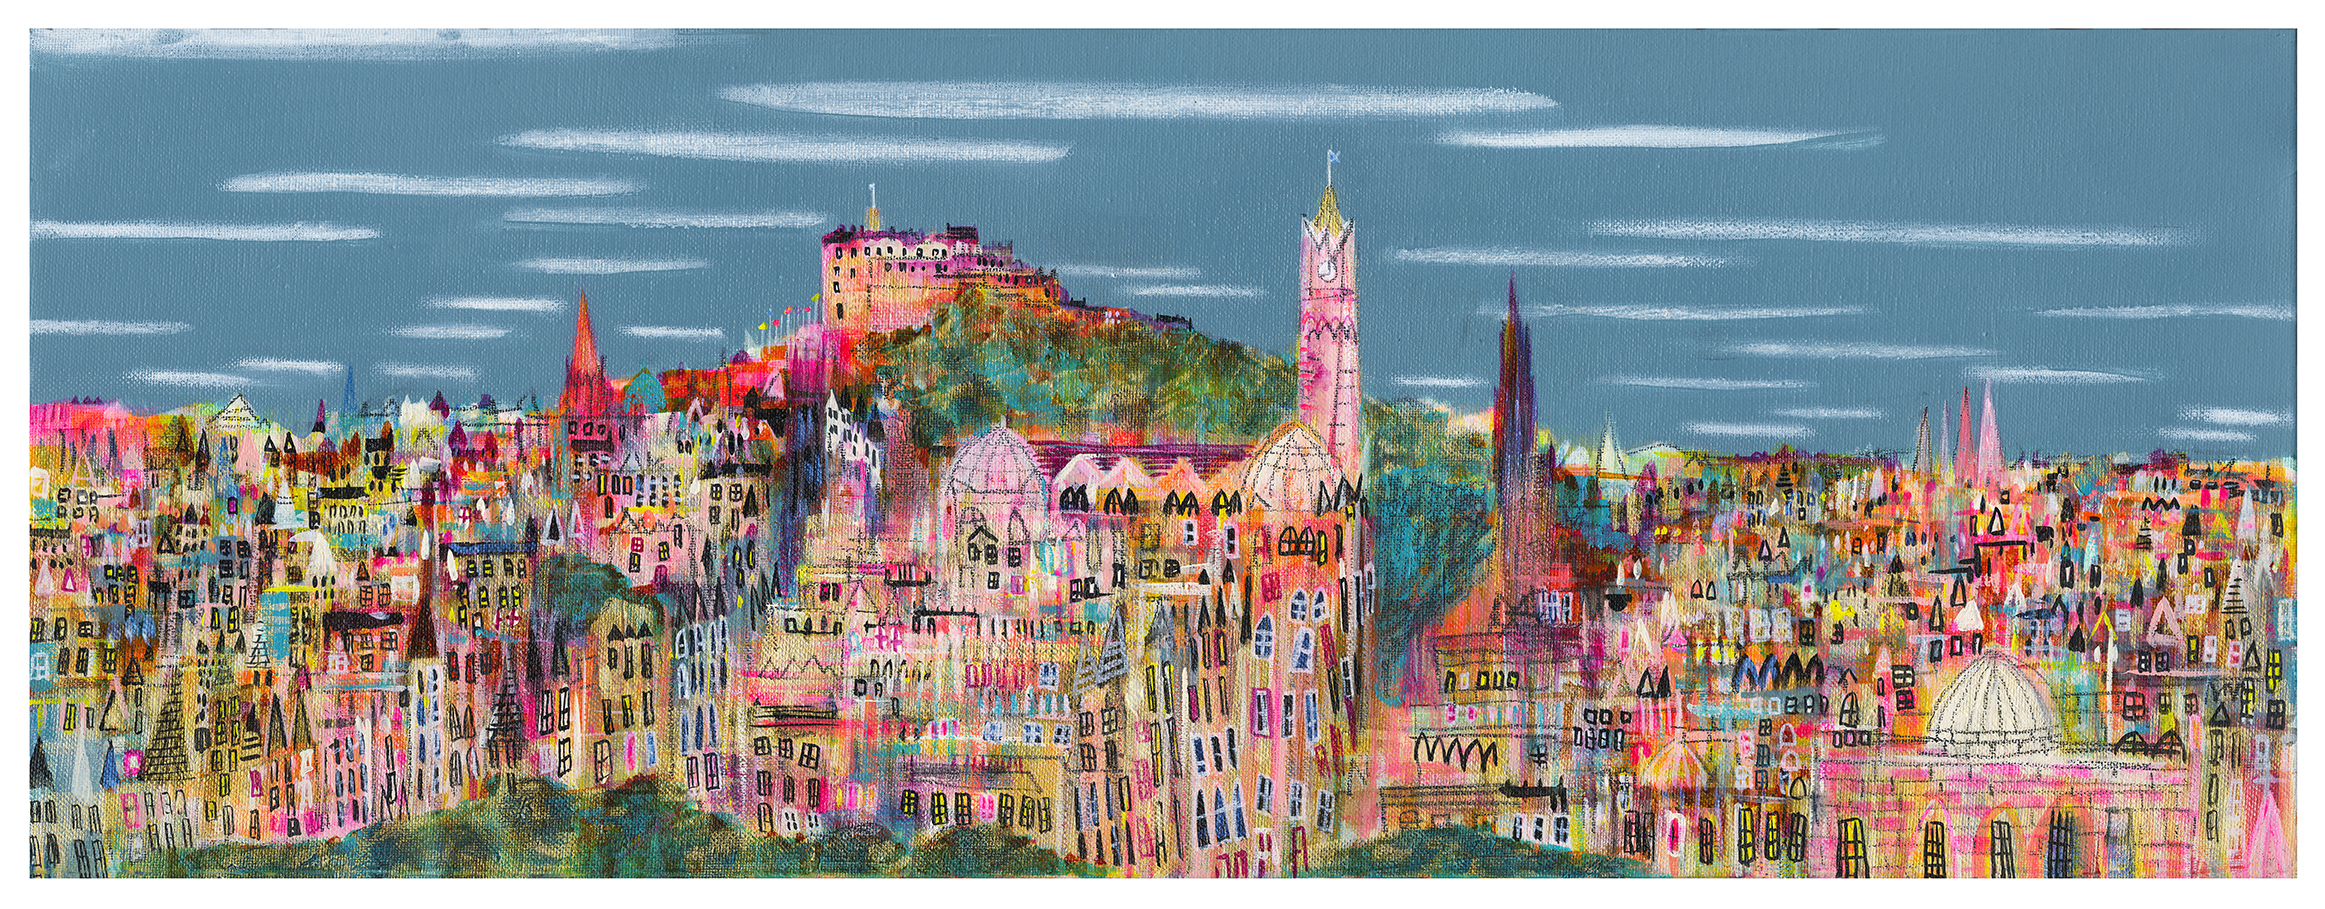 A colorful and stylized panoramic illustration of a cityscape with varied architecture and a castle-like structure on a hill. By Nikki Monaghan